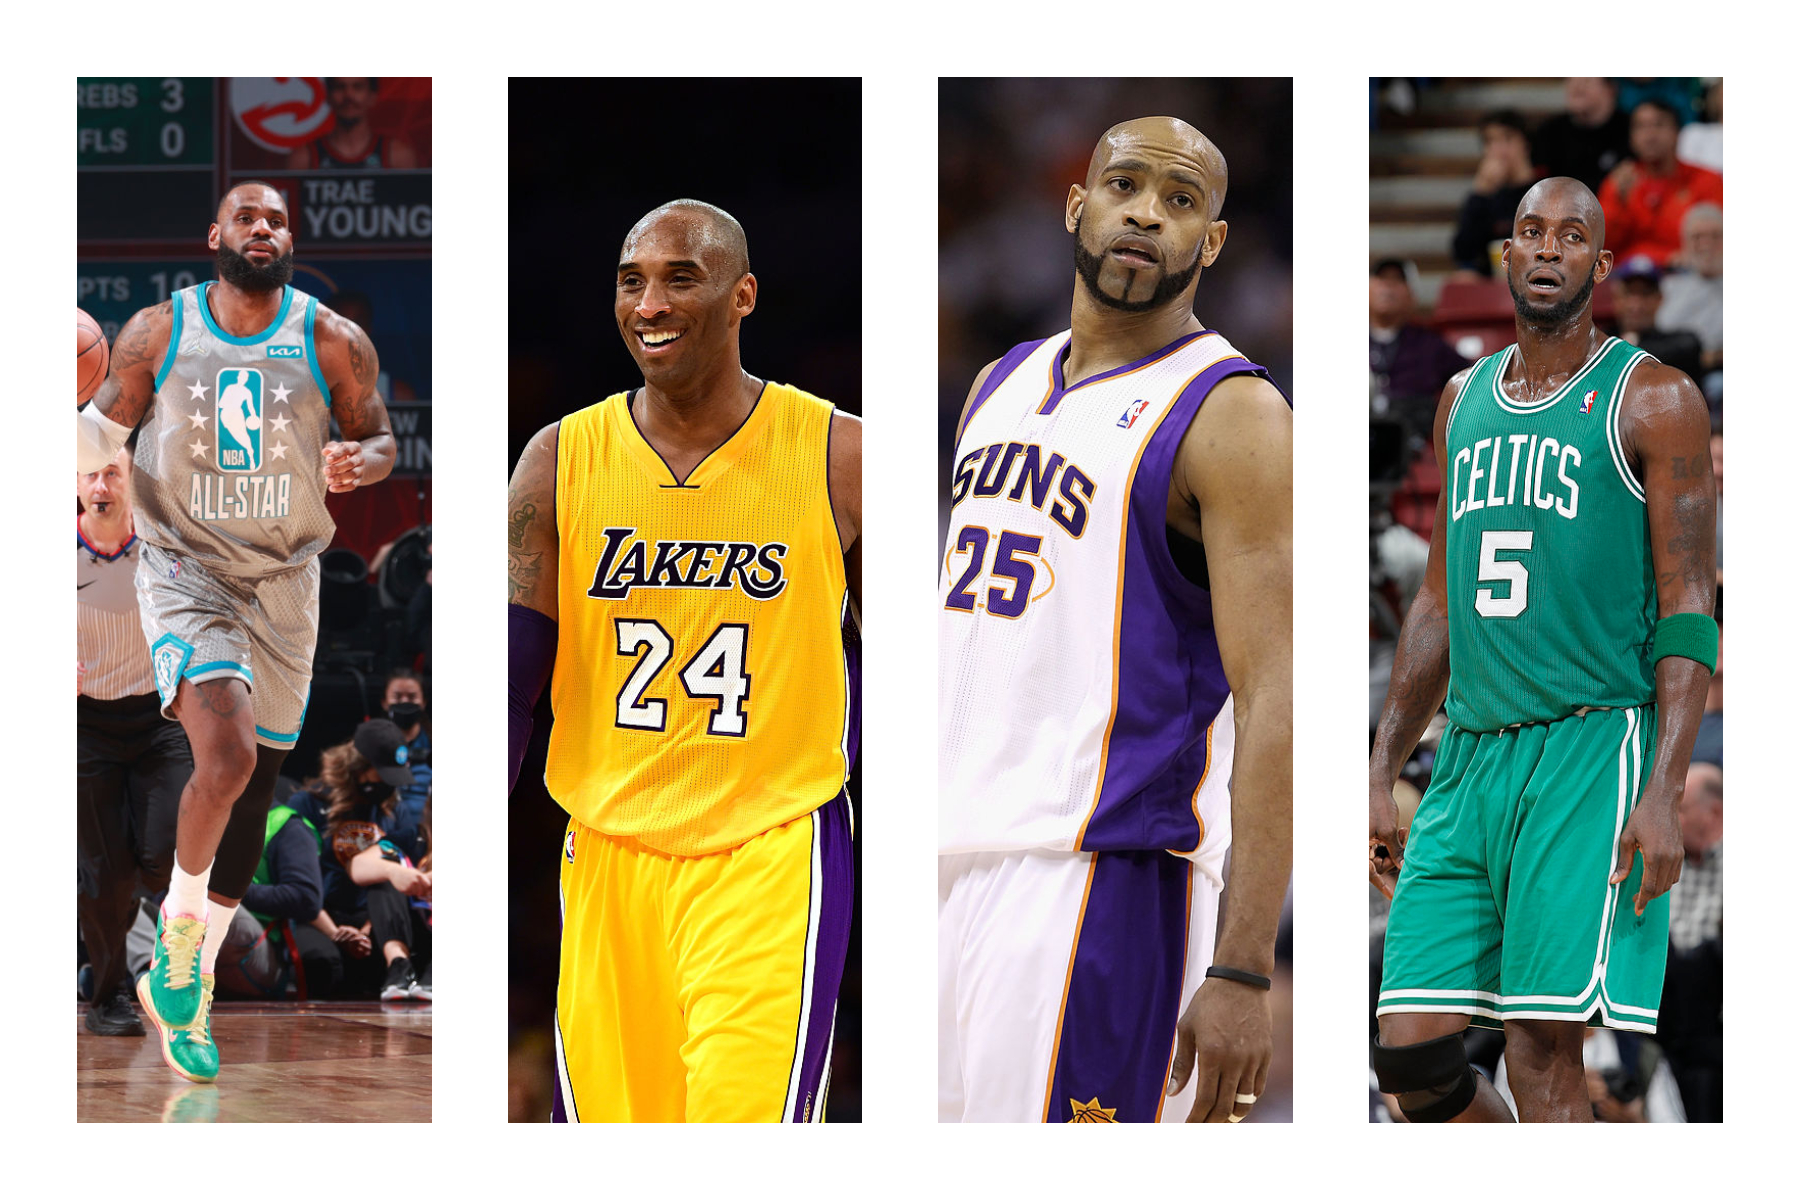 Who has the longest NBA career? 10 players who have played in the league the longest